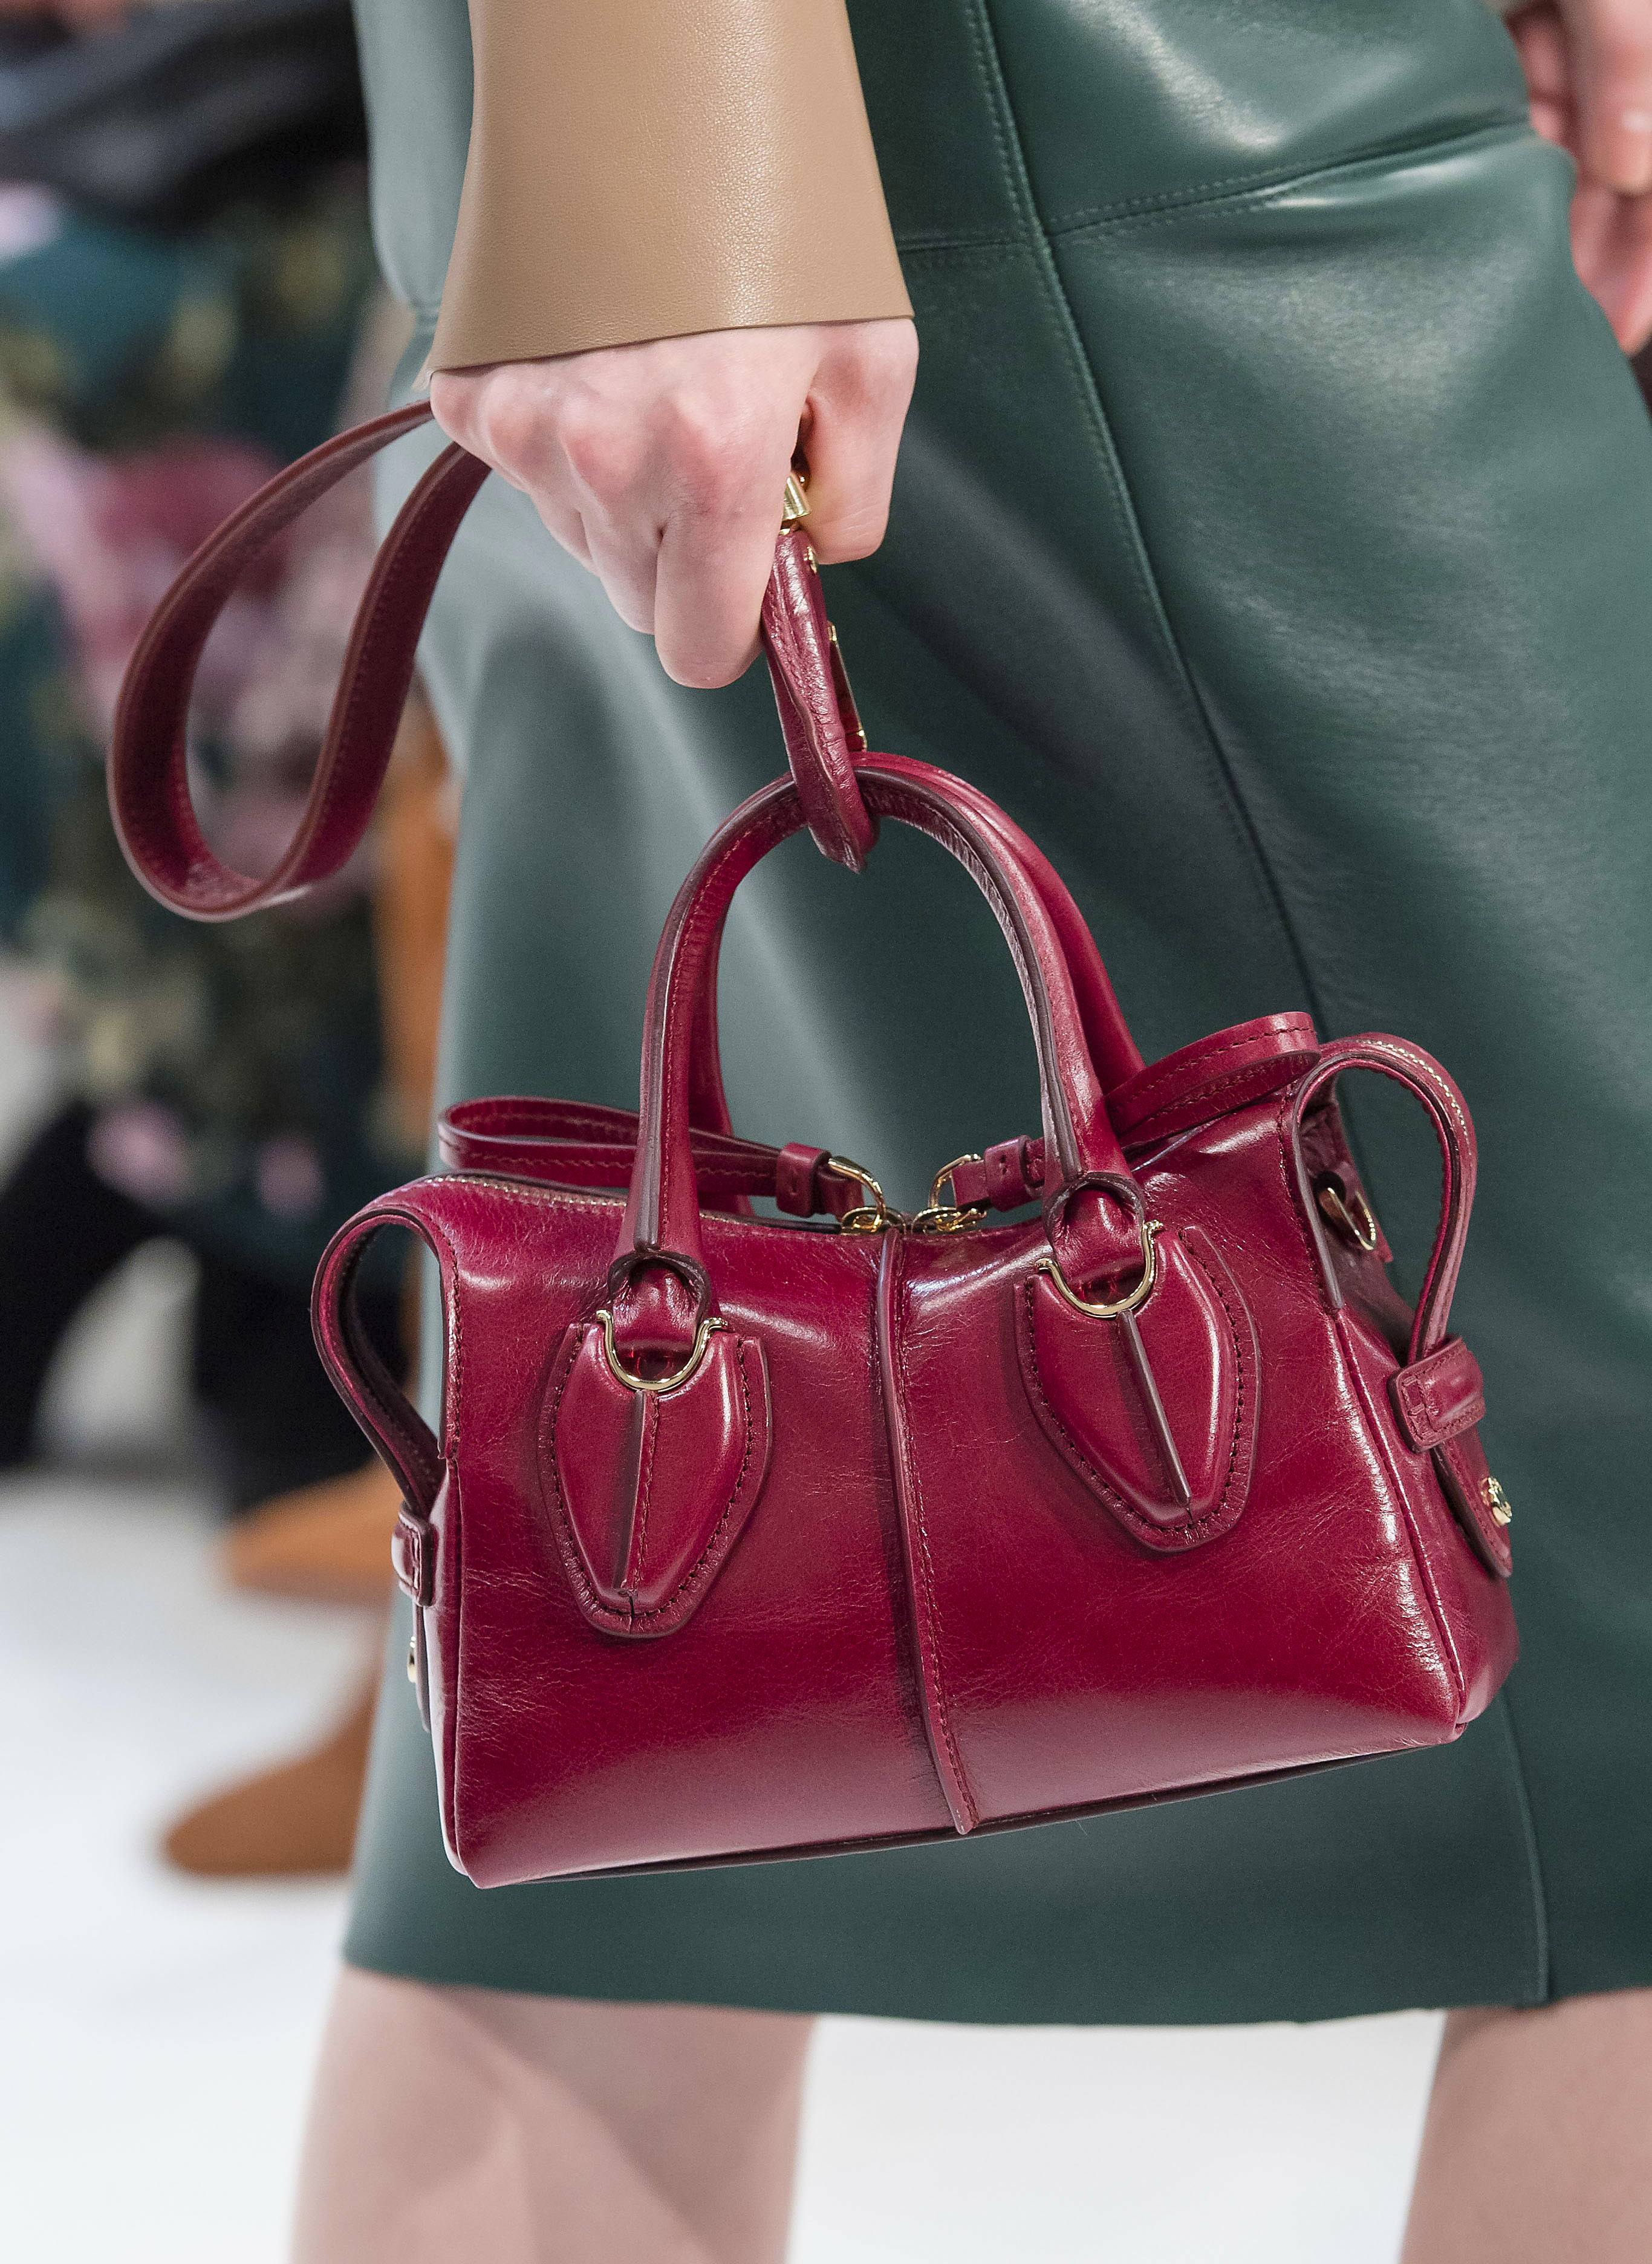 Tod's D-Styling small handbag from the Fall 2019 Runway Bag Collection